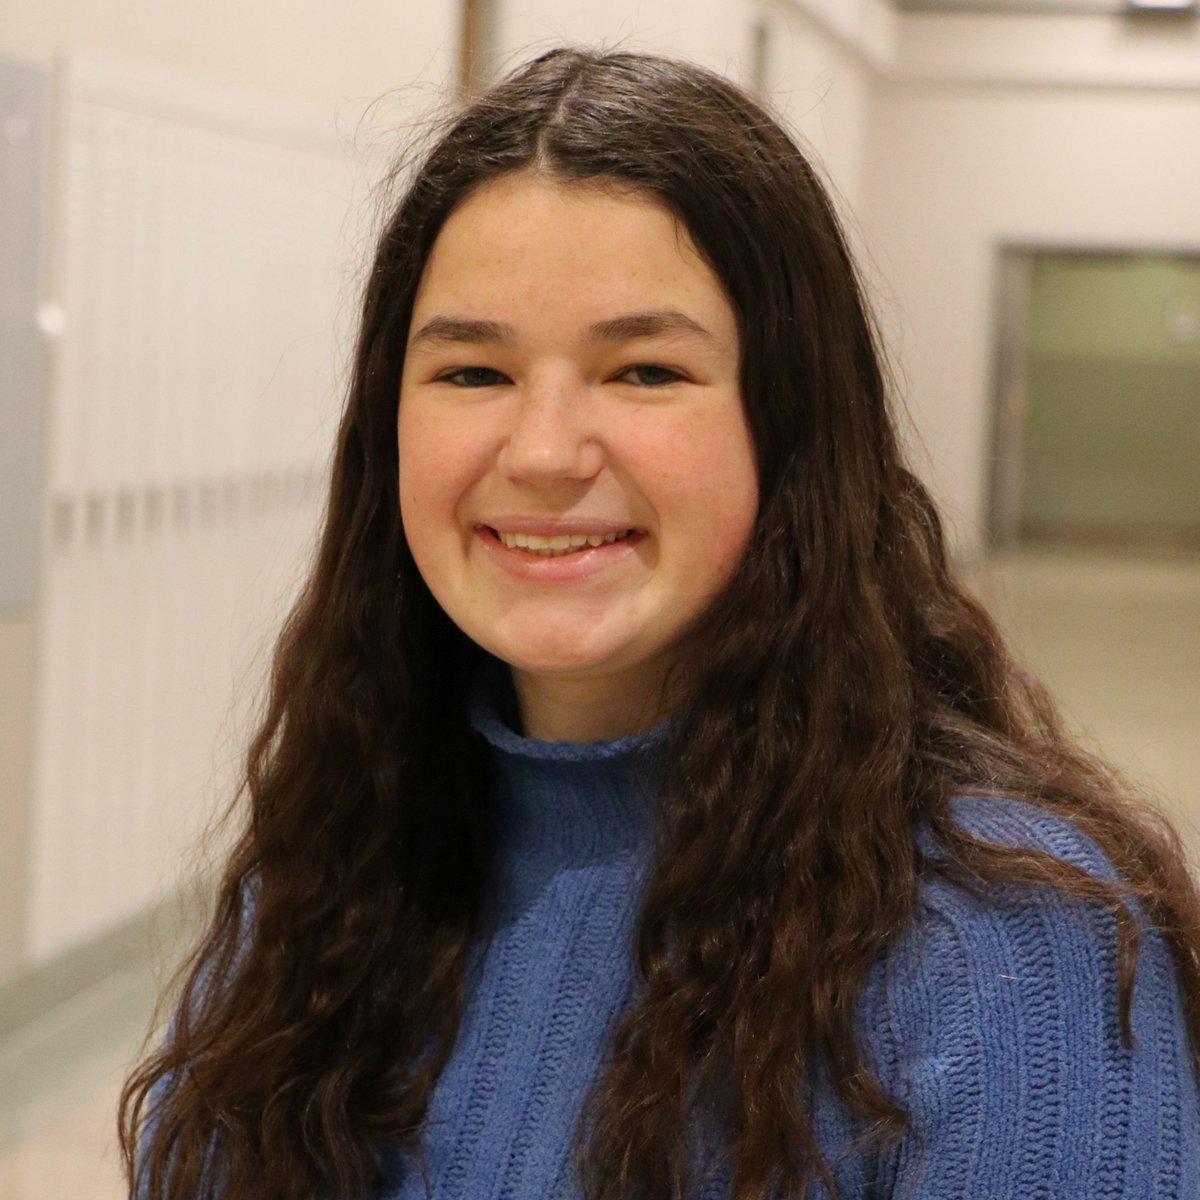 Tiger Pride for senior Adelaide Lenz who was chosen for the NYSED Special Education Youth Advisory Panel where she gets the chance to share her unique perspective and possibly influence the direction of special education policy for kids across the state. amherstschools.org/youthpanel